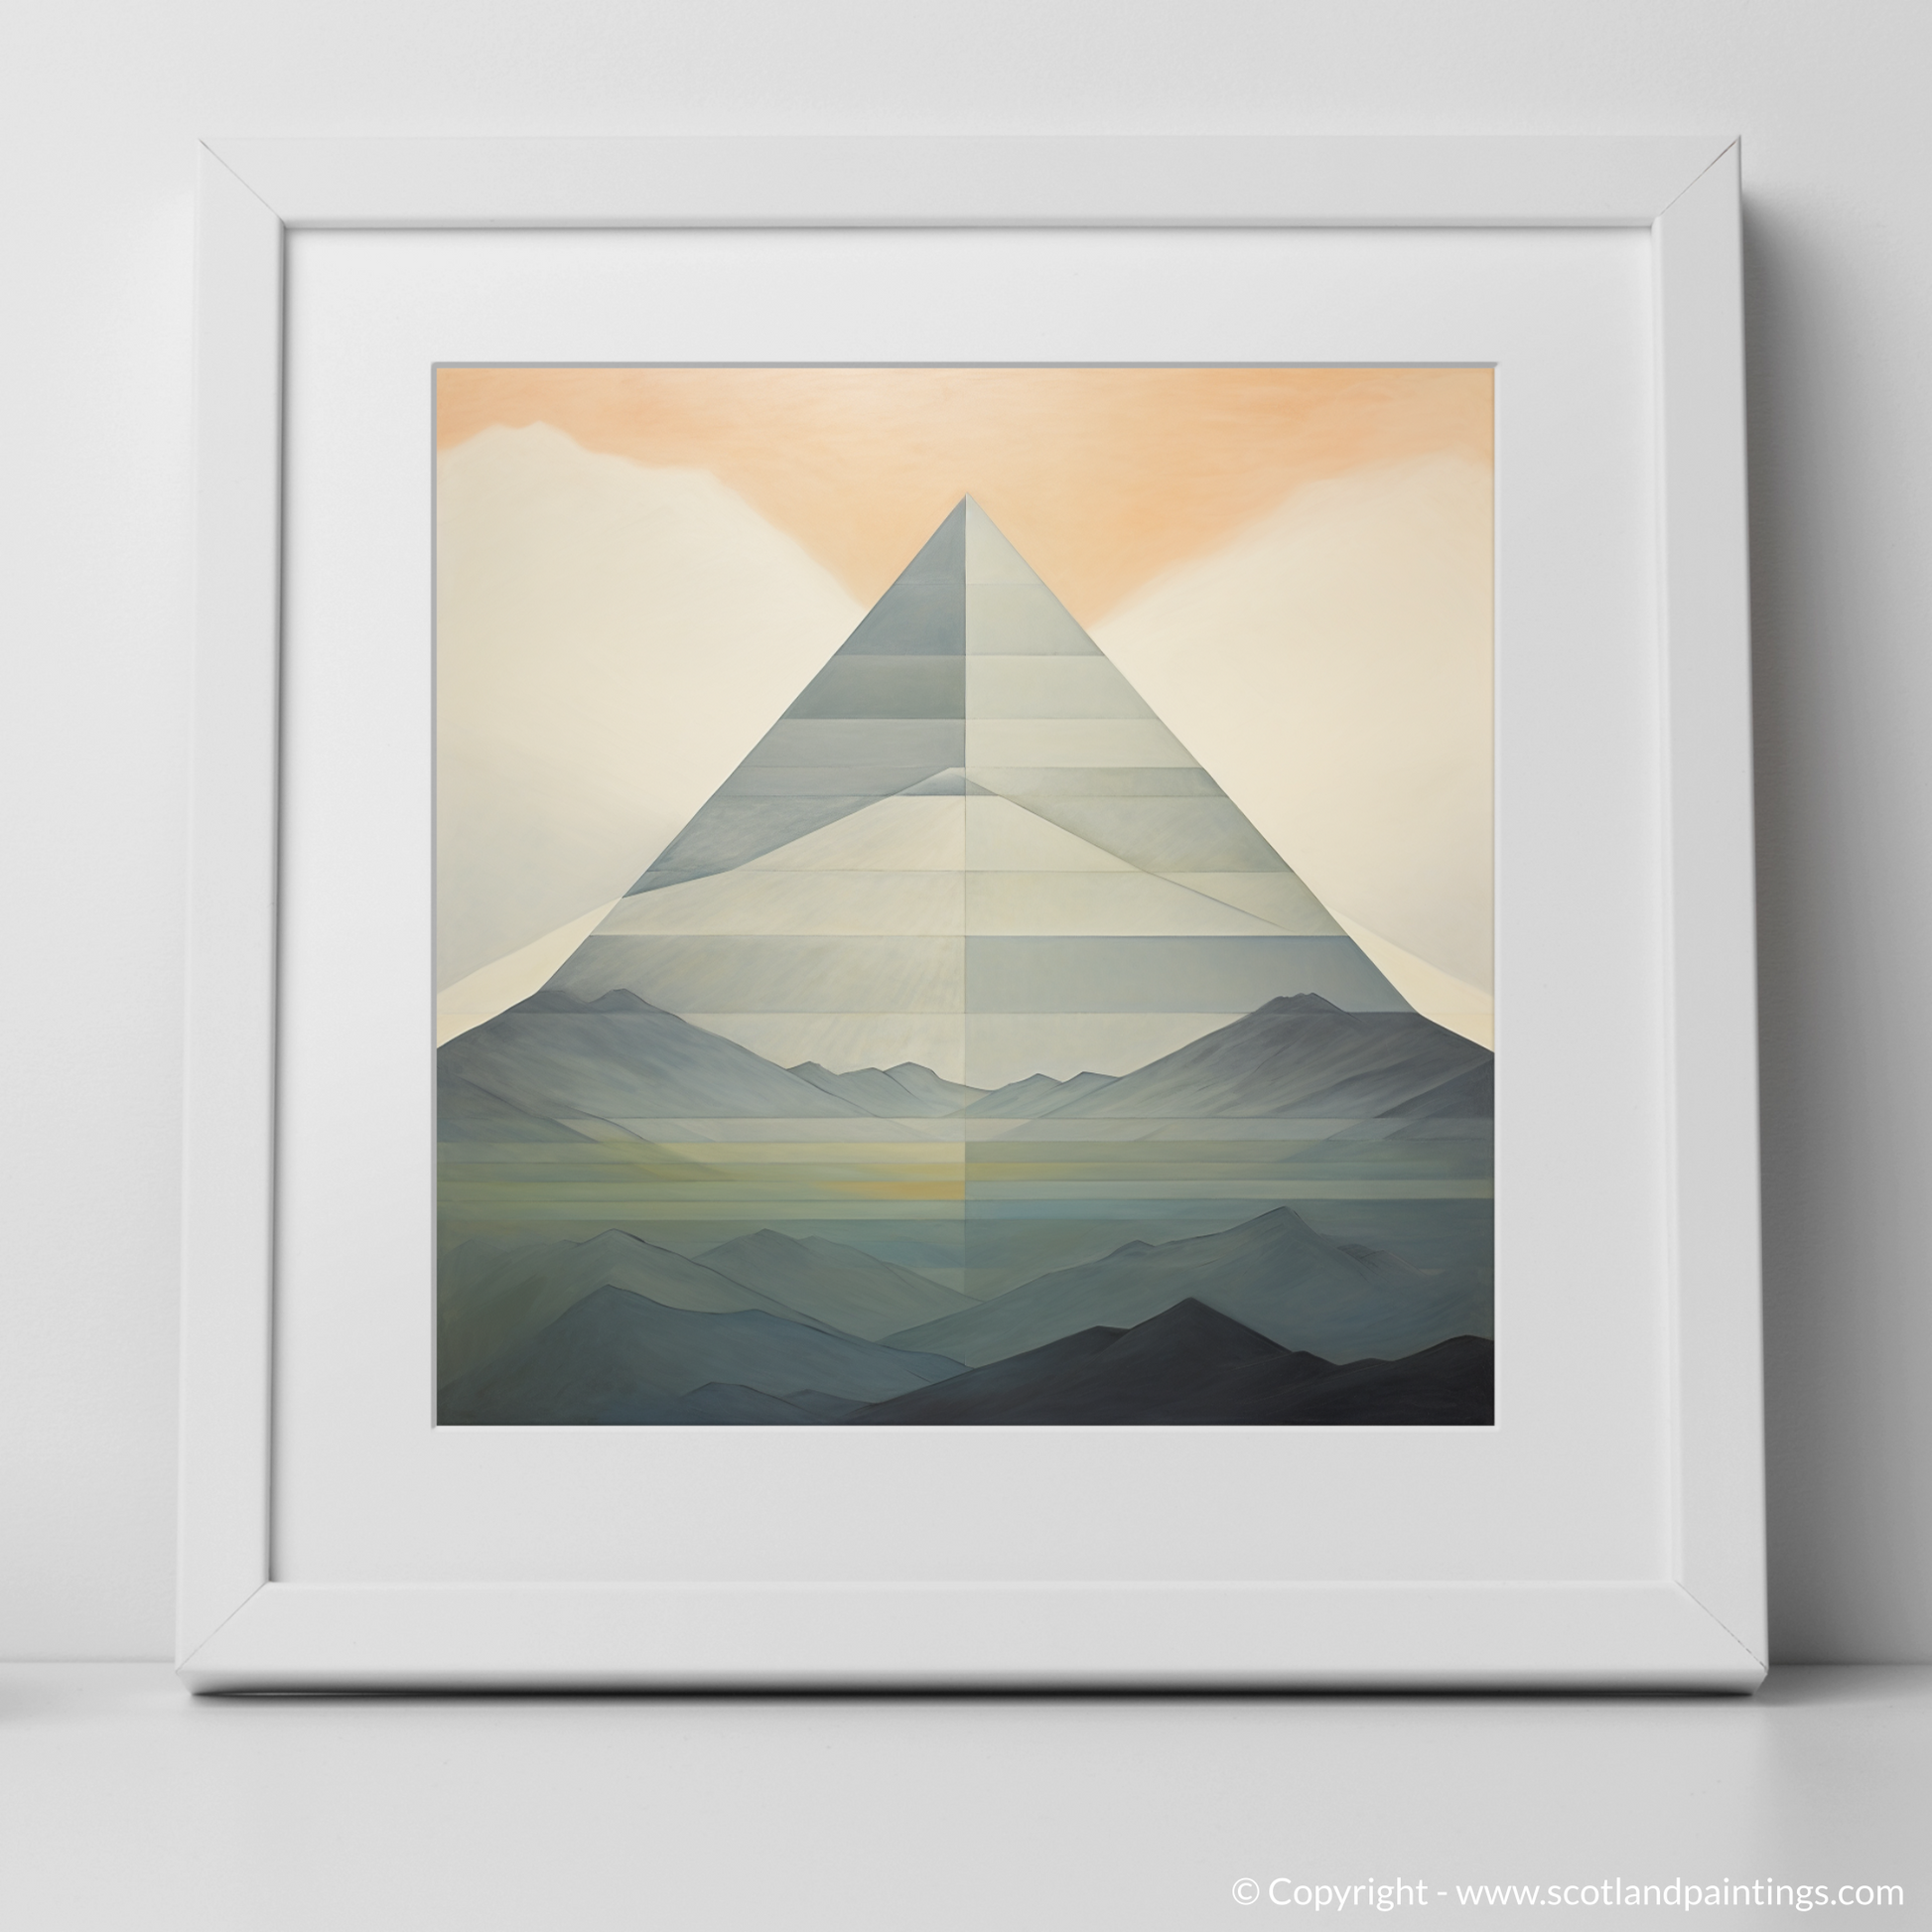 Art Print of Creag Mhòr (Meall na Aighean) with a white frame